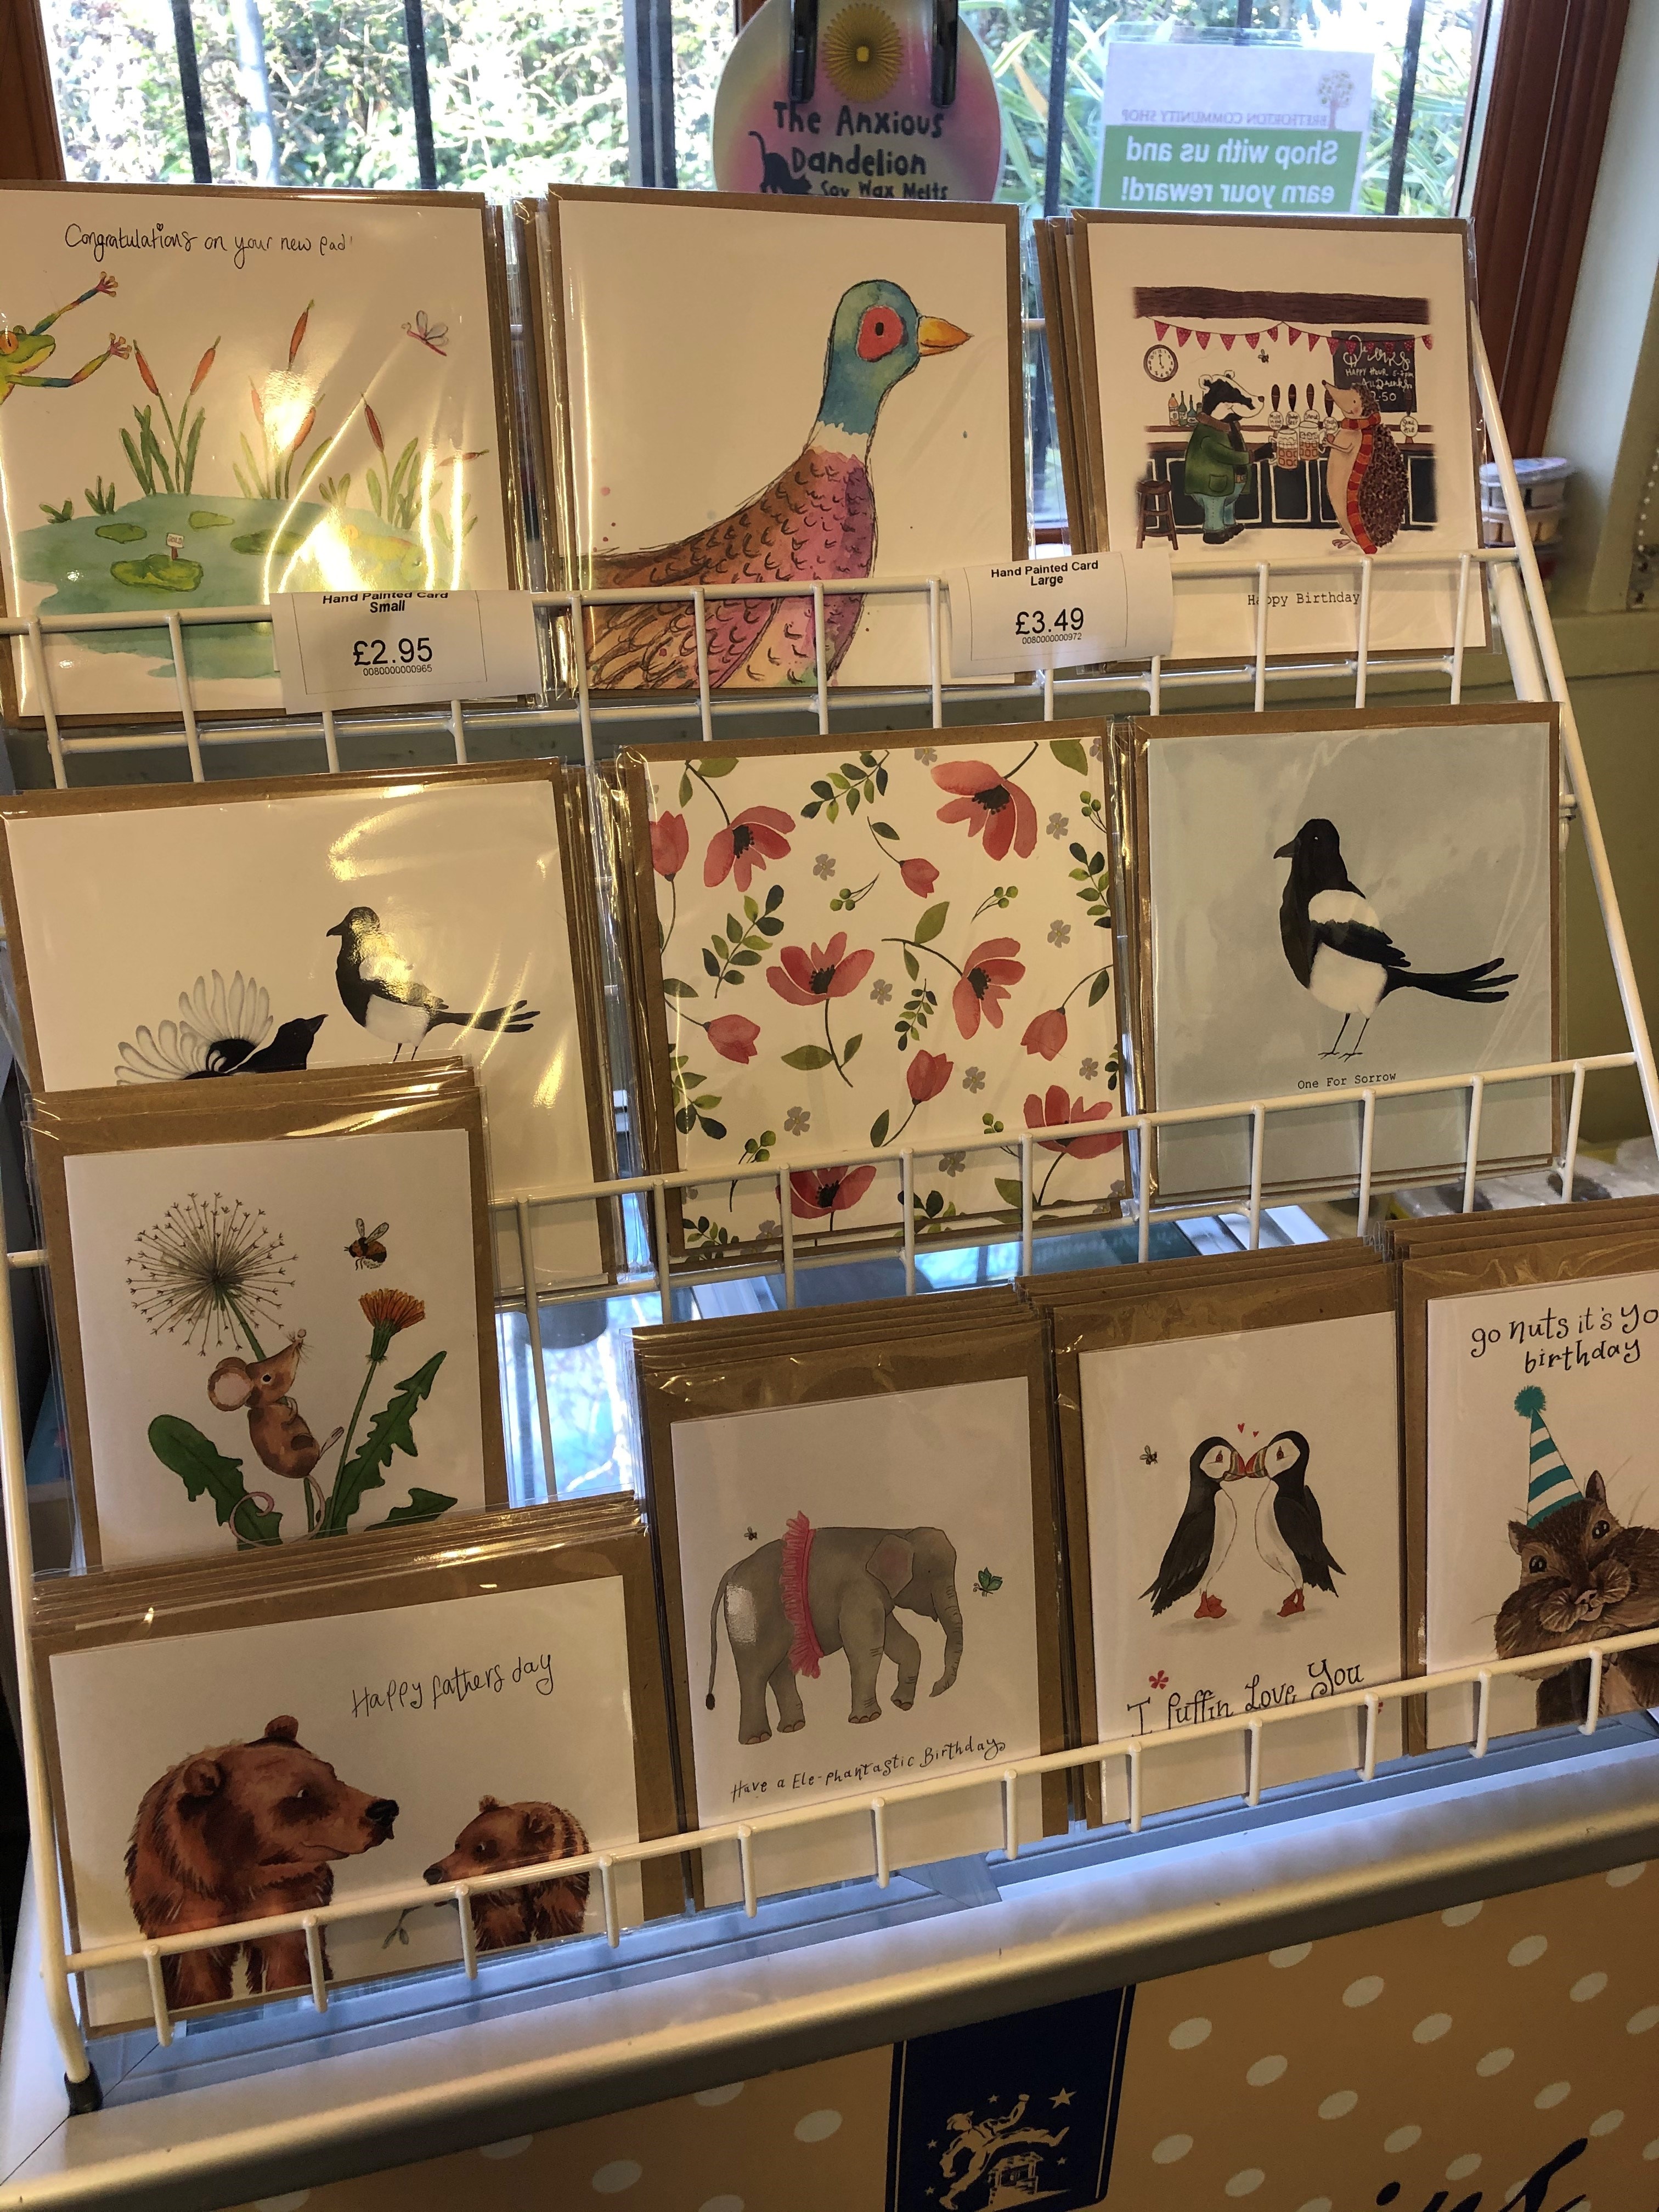 A photo of a rack of greetings cards